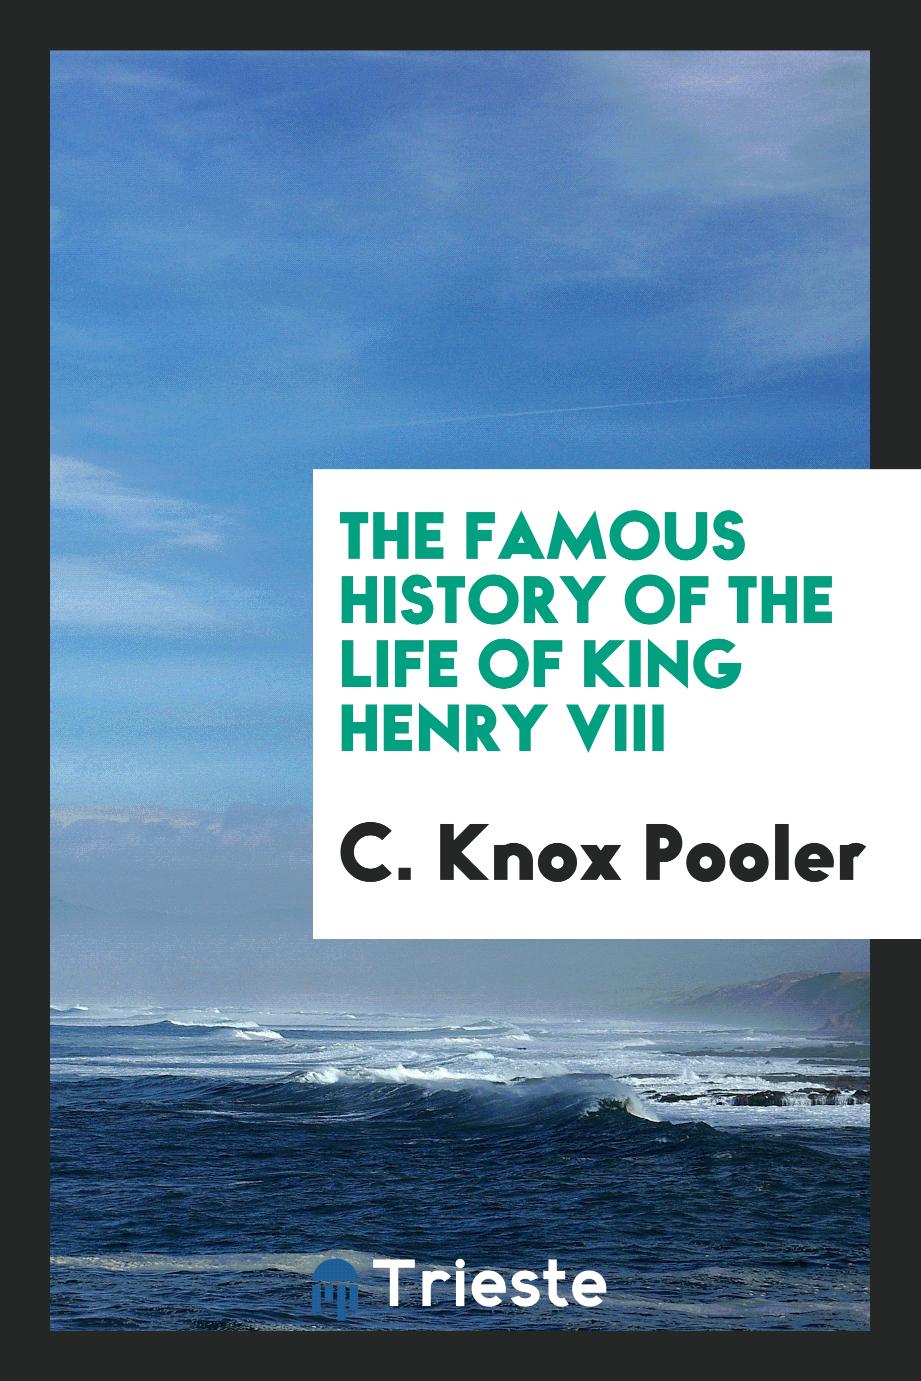 The famous history of the life of King Henry VIII